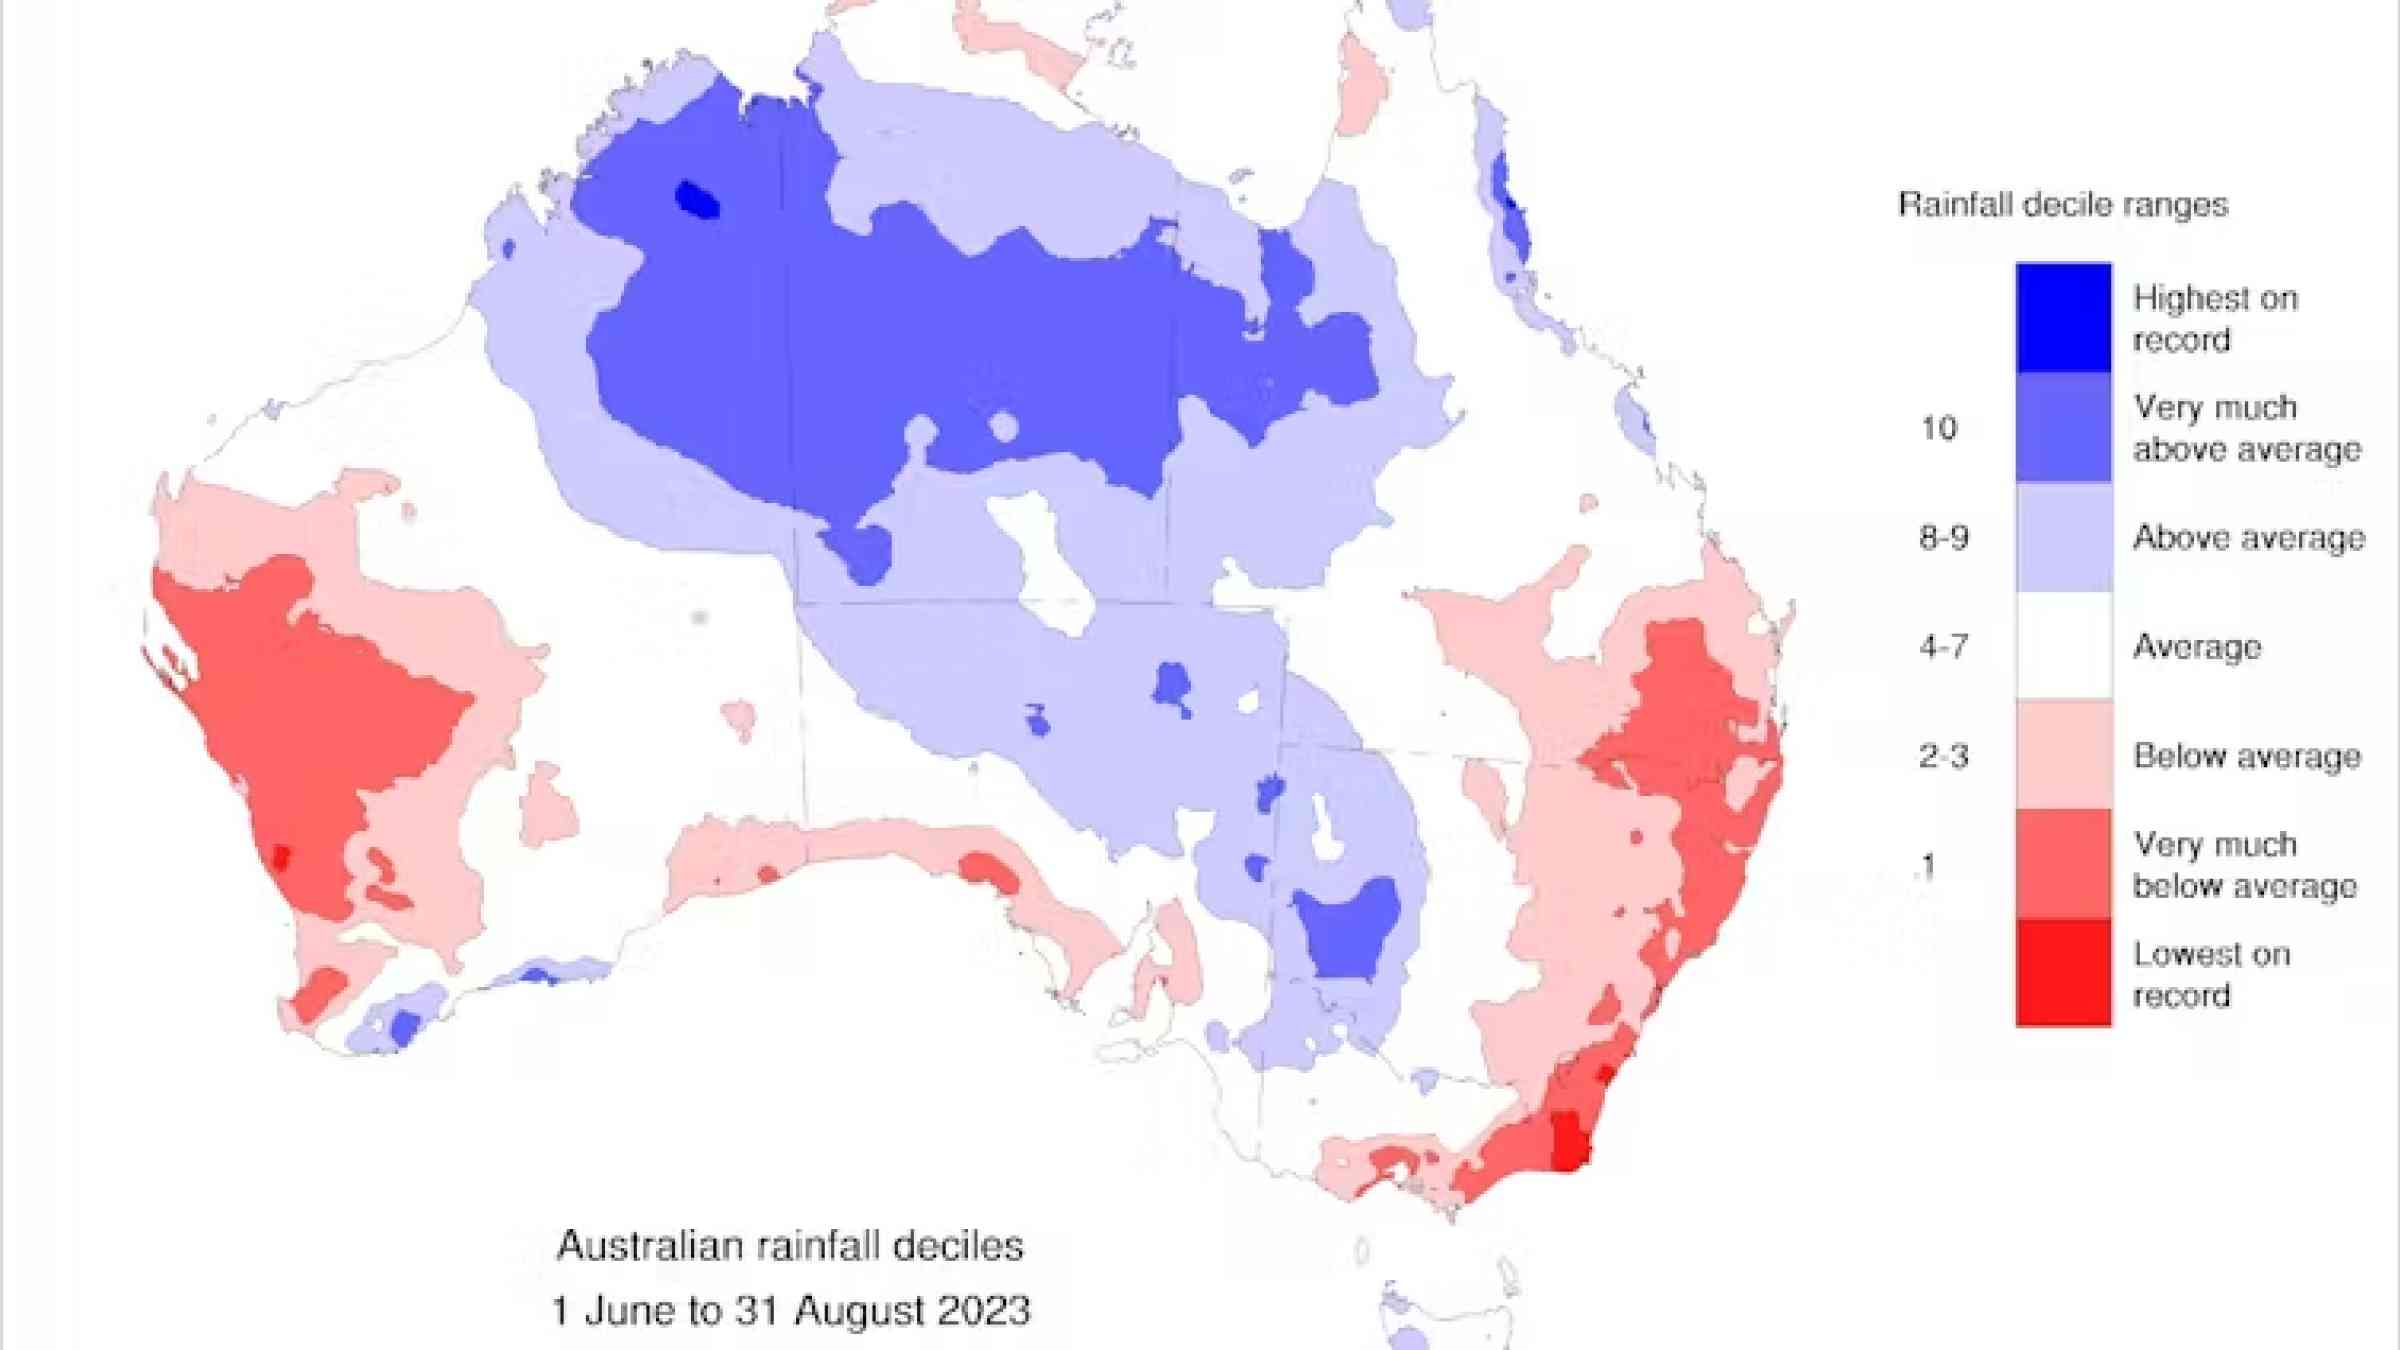 A map of Australia showing rainfall deciles